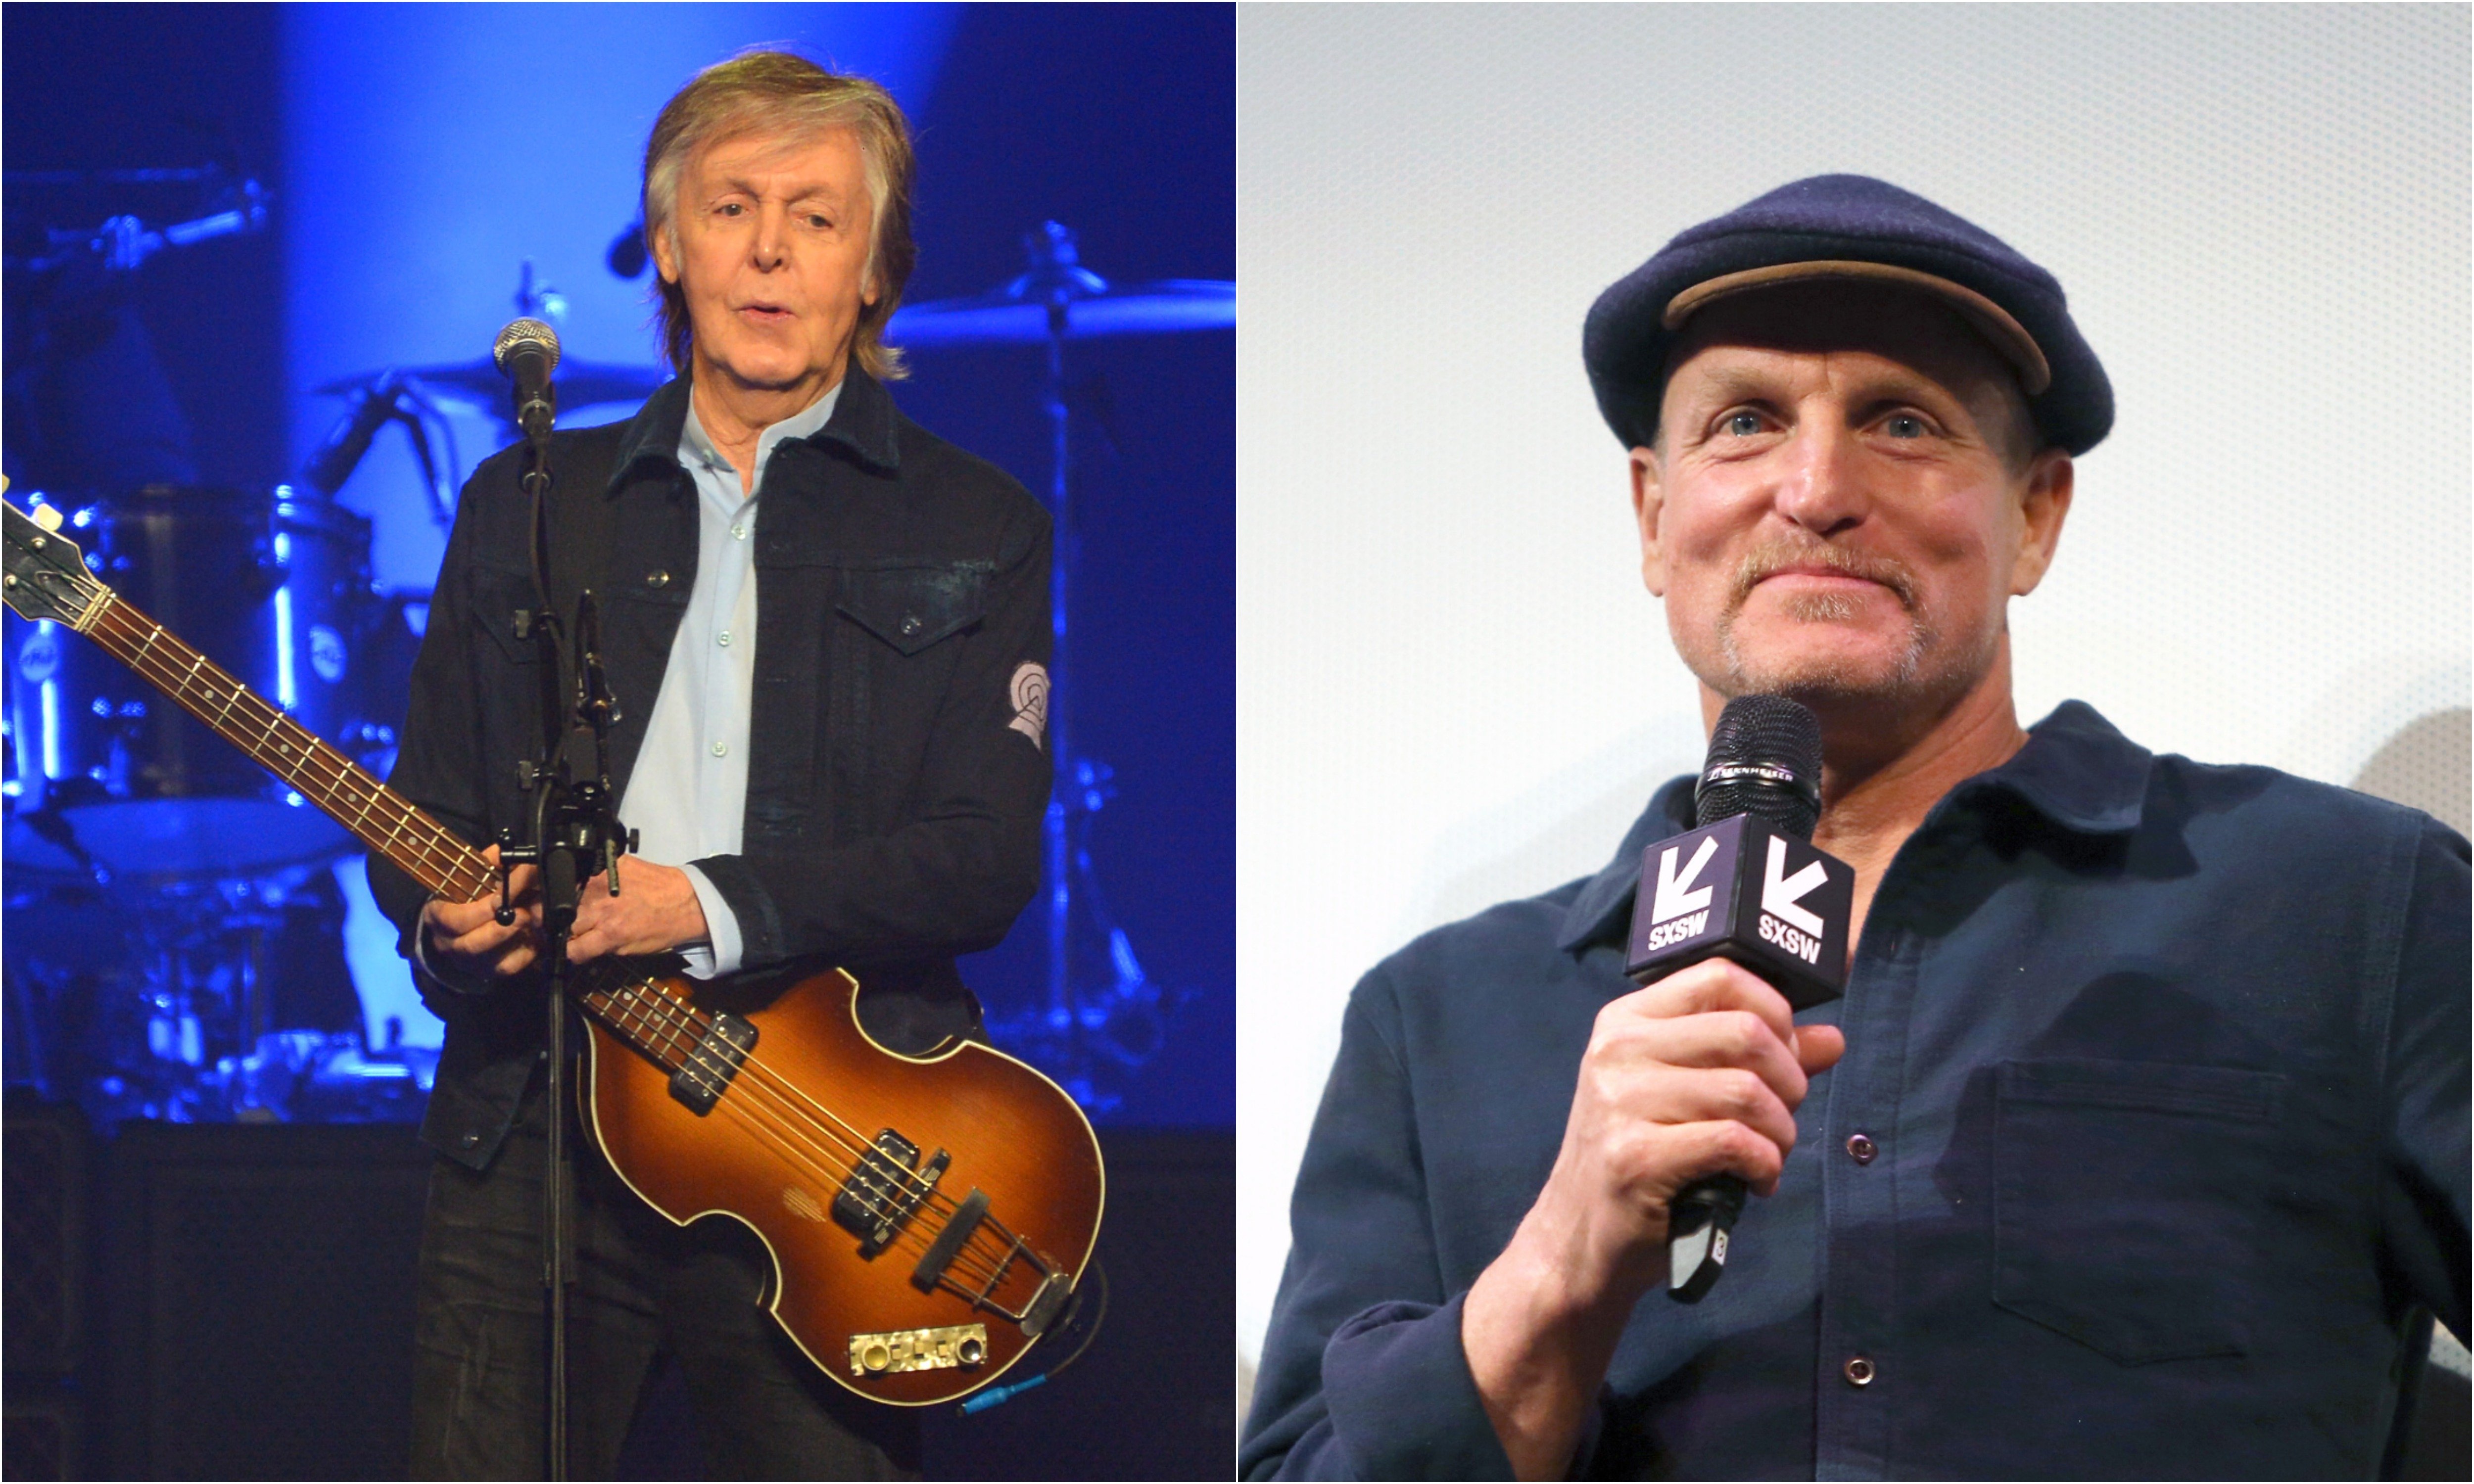 A joined photo of Paul McCartney and Woody Harrelson